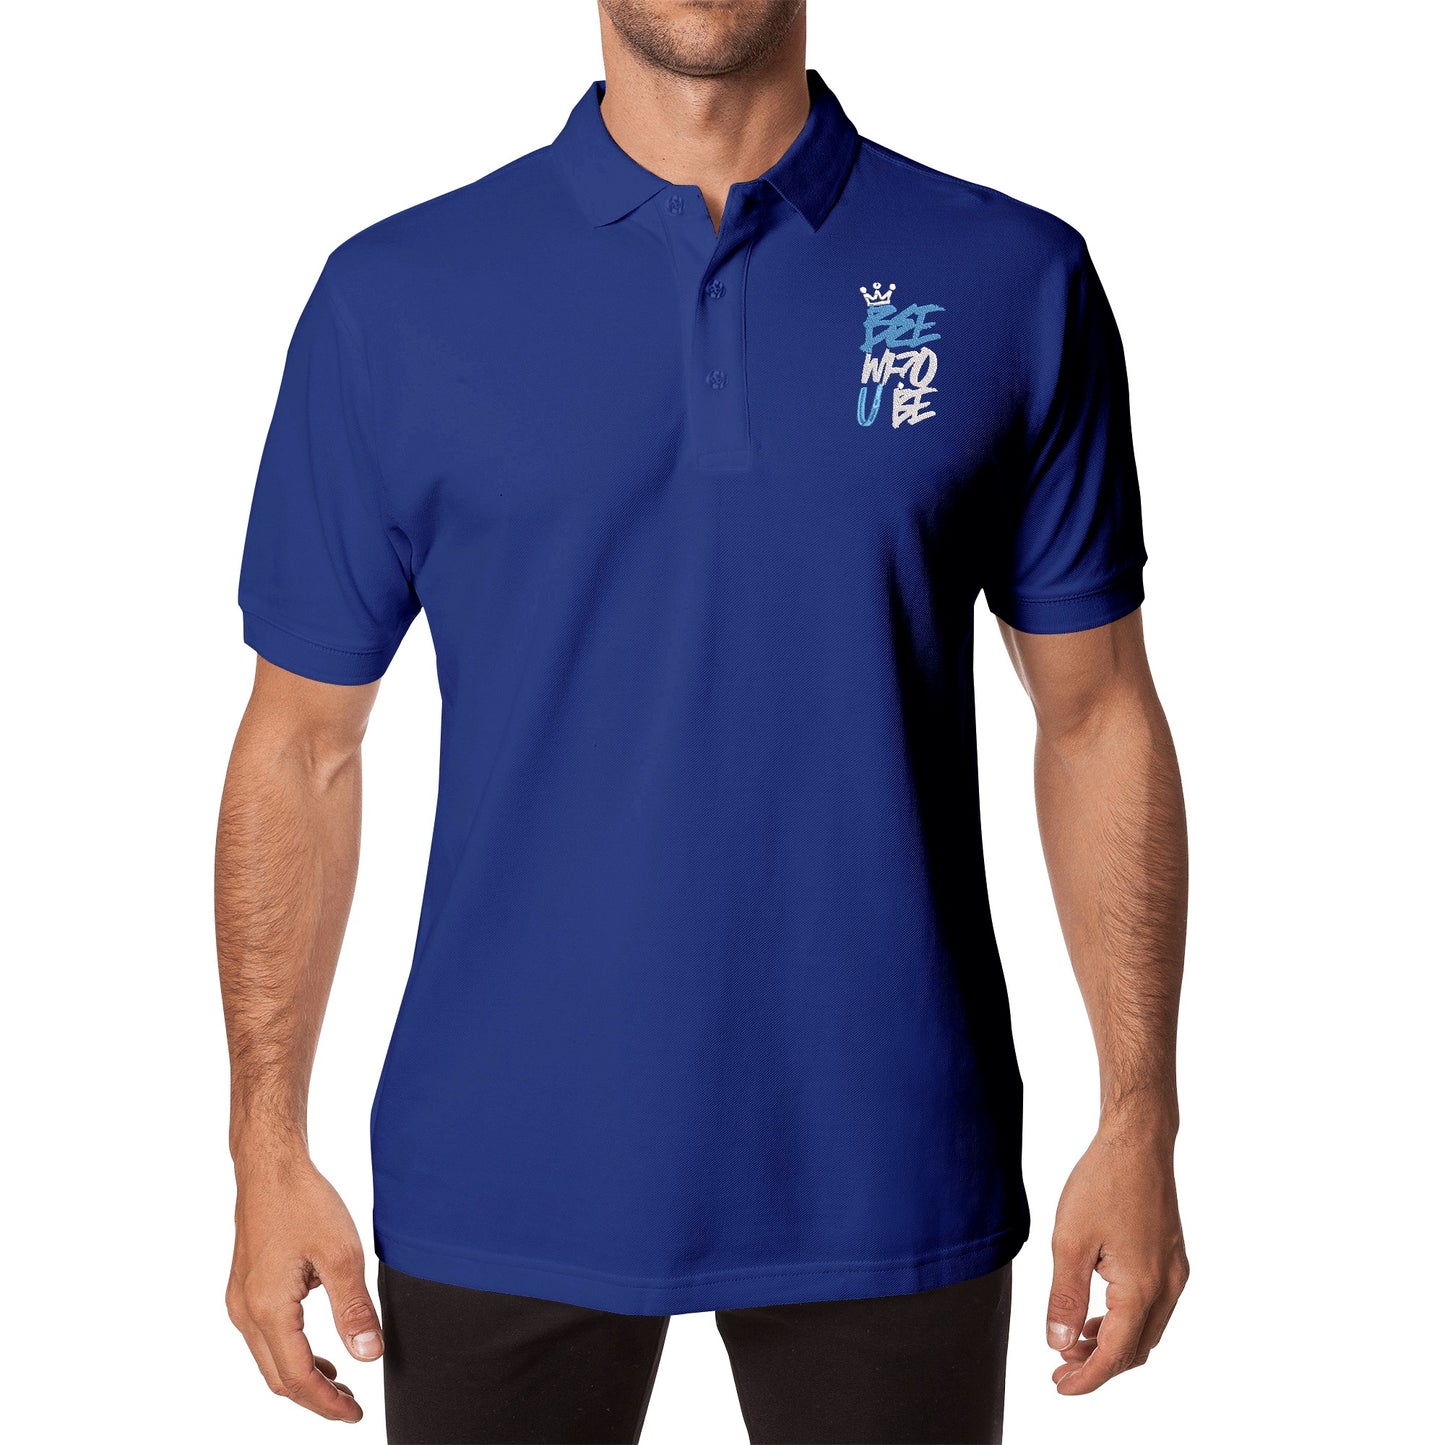 Bee Who U Be Embroidered Unisex Cotton Polo Shirt With Logo